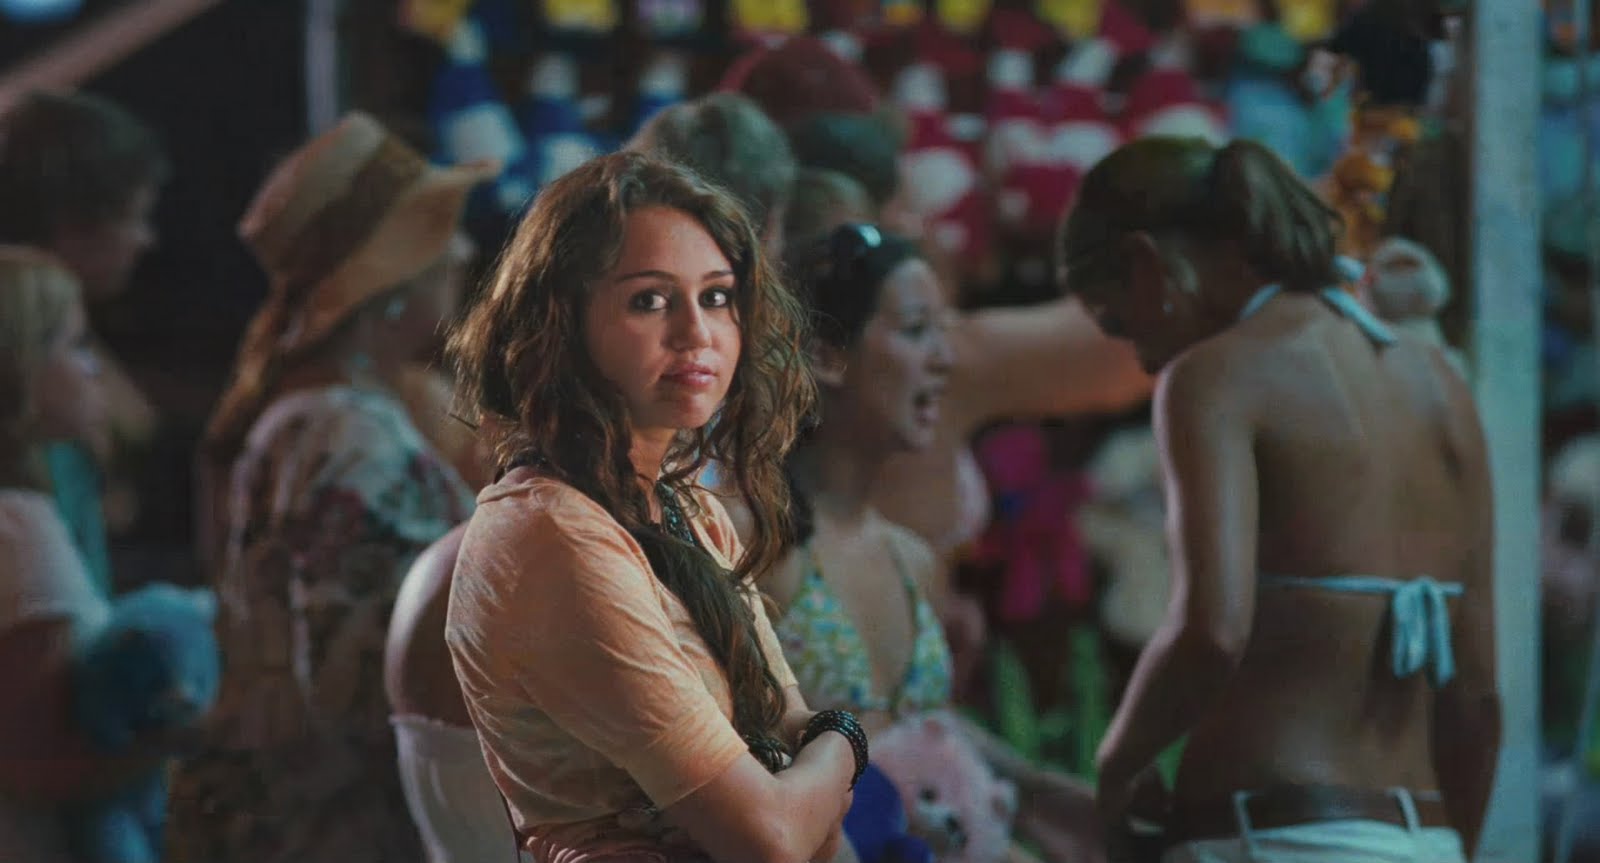 Miley Cyrus in The Last Song